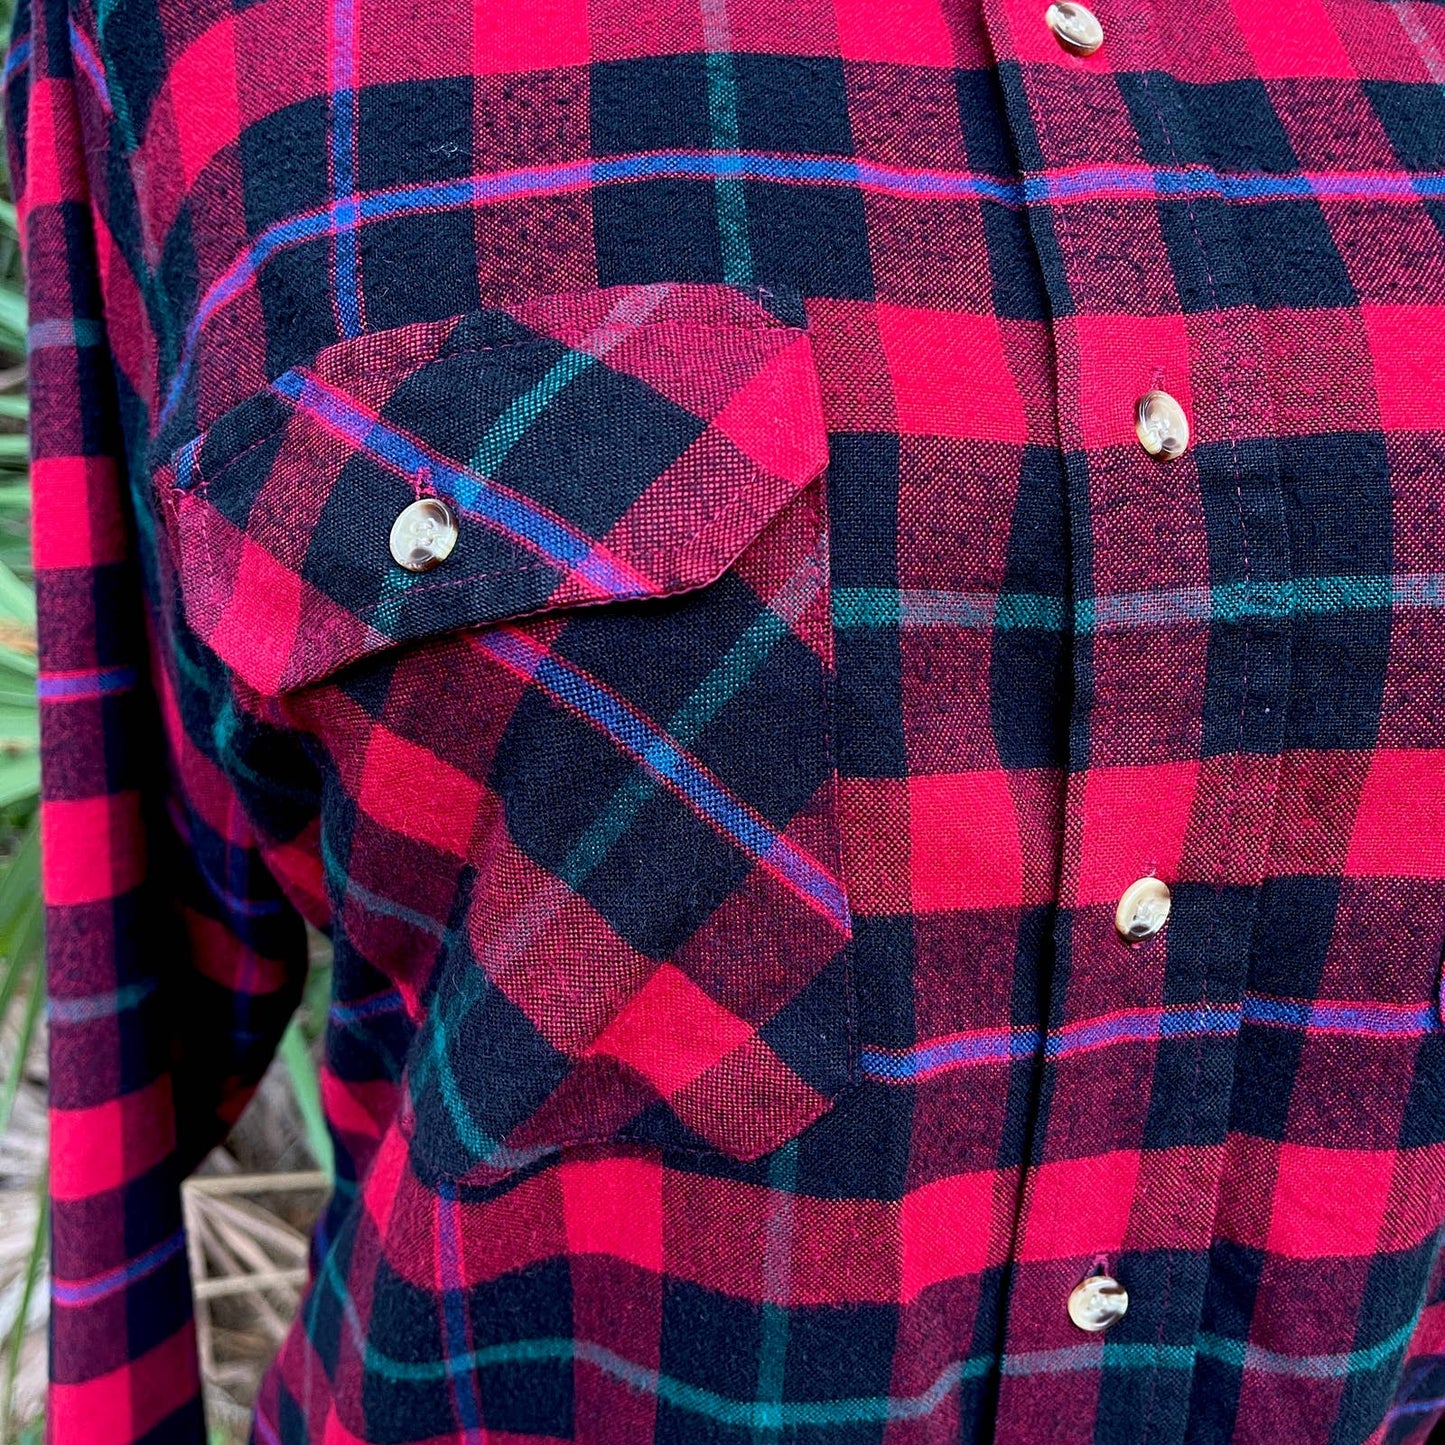 Vintage 90s Plaid Flannel Blue Red Gray Long Sleeves Northwest Territory Size M